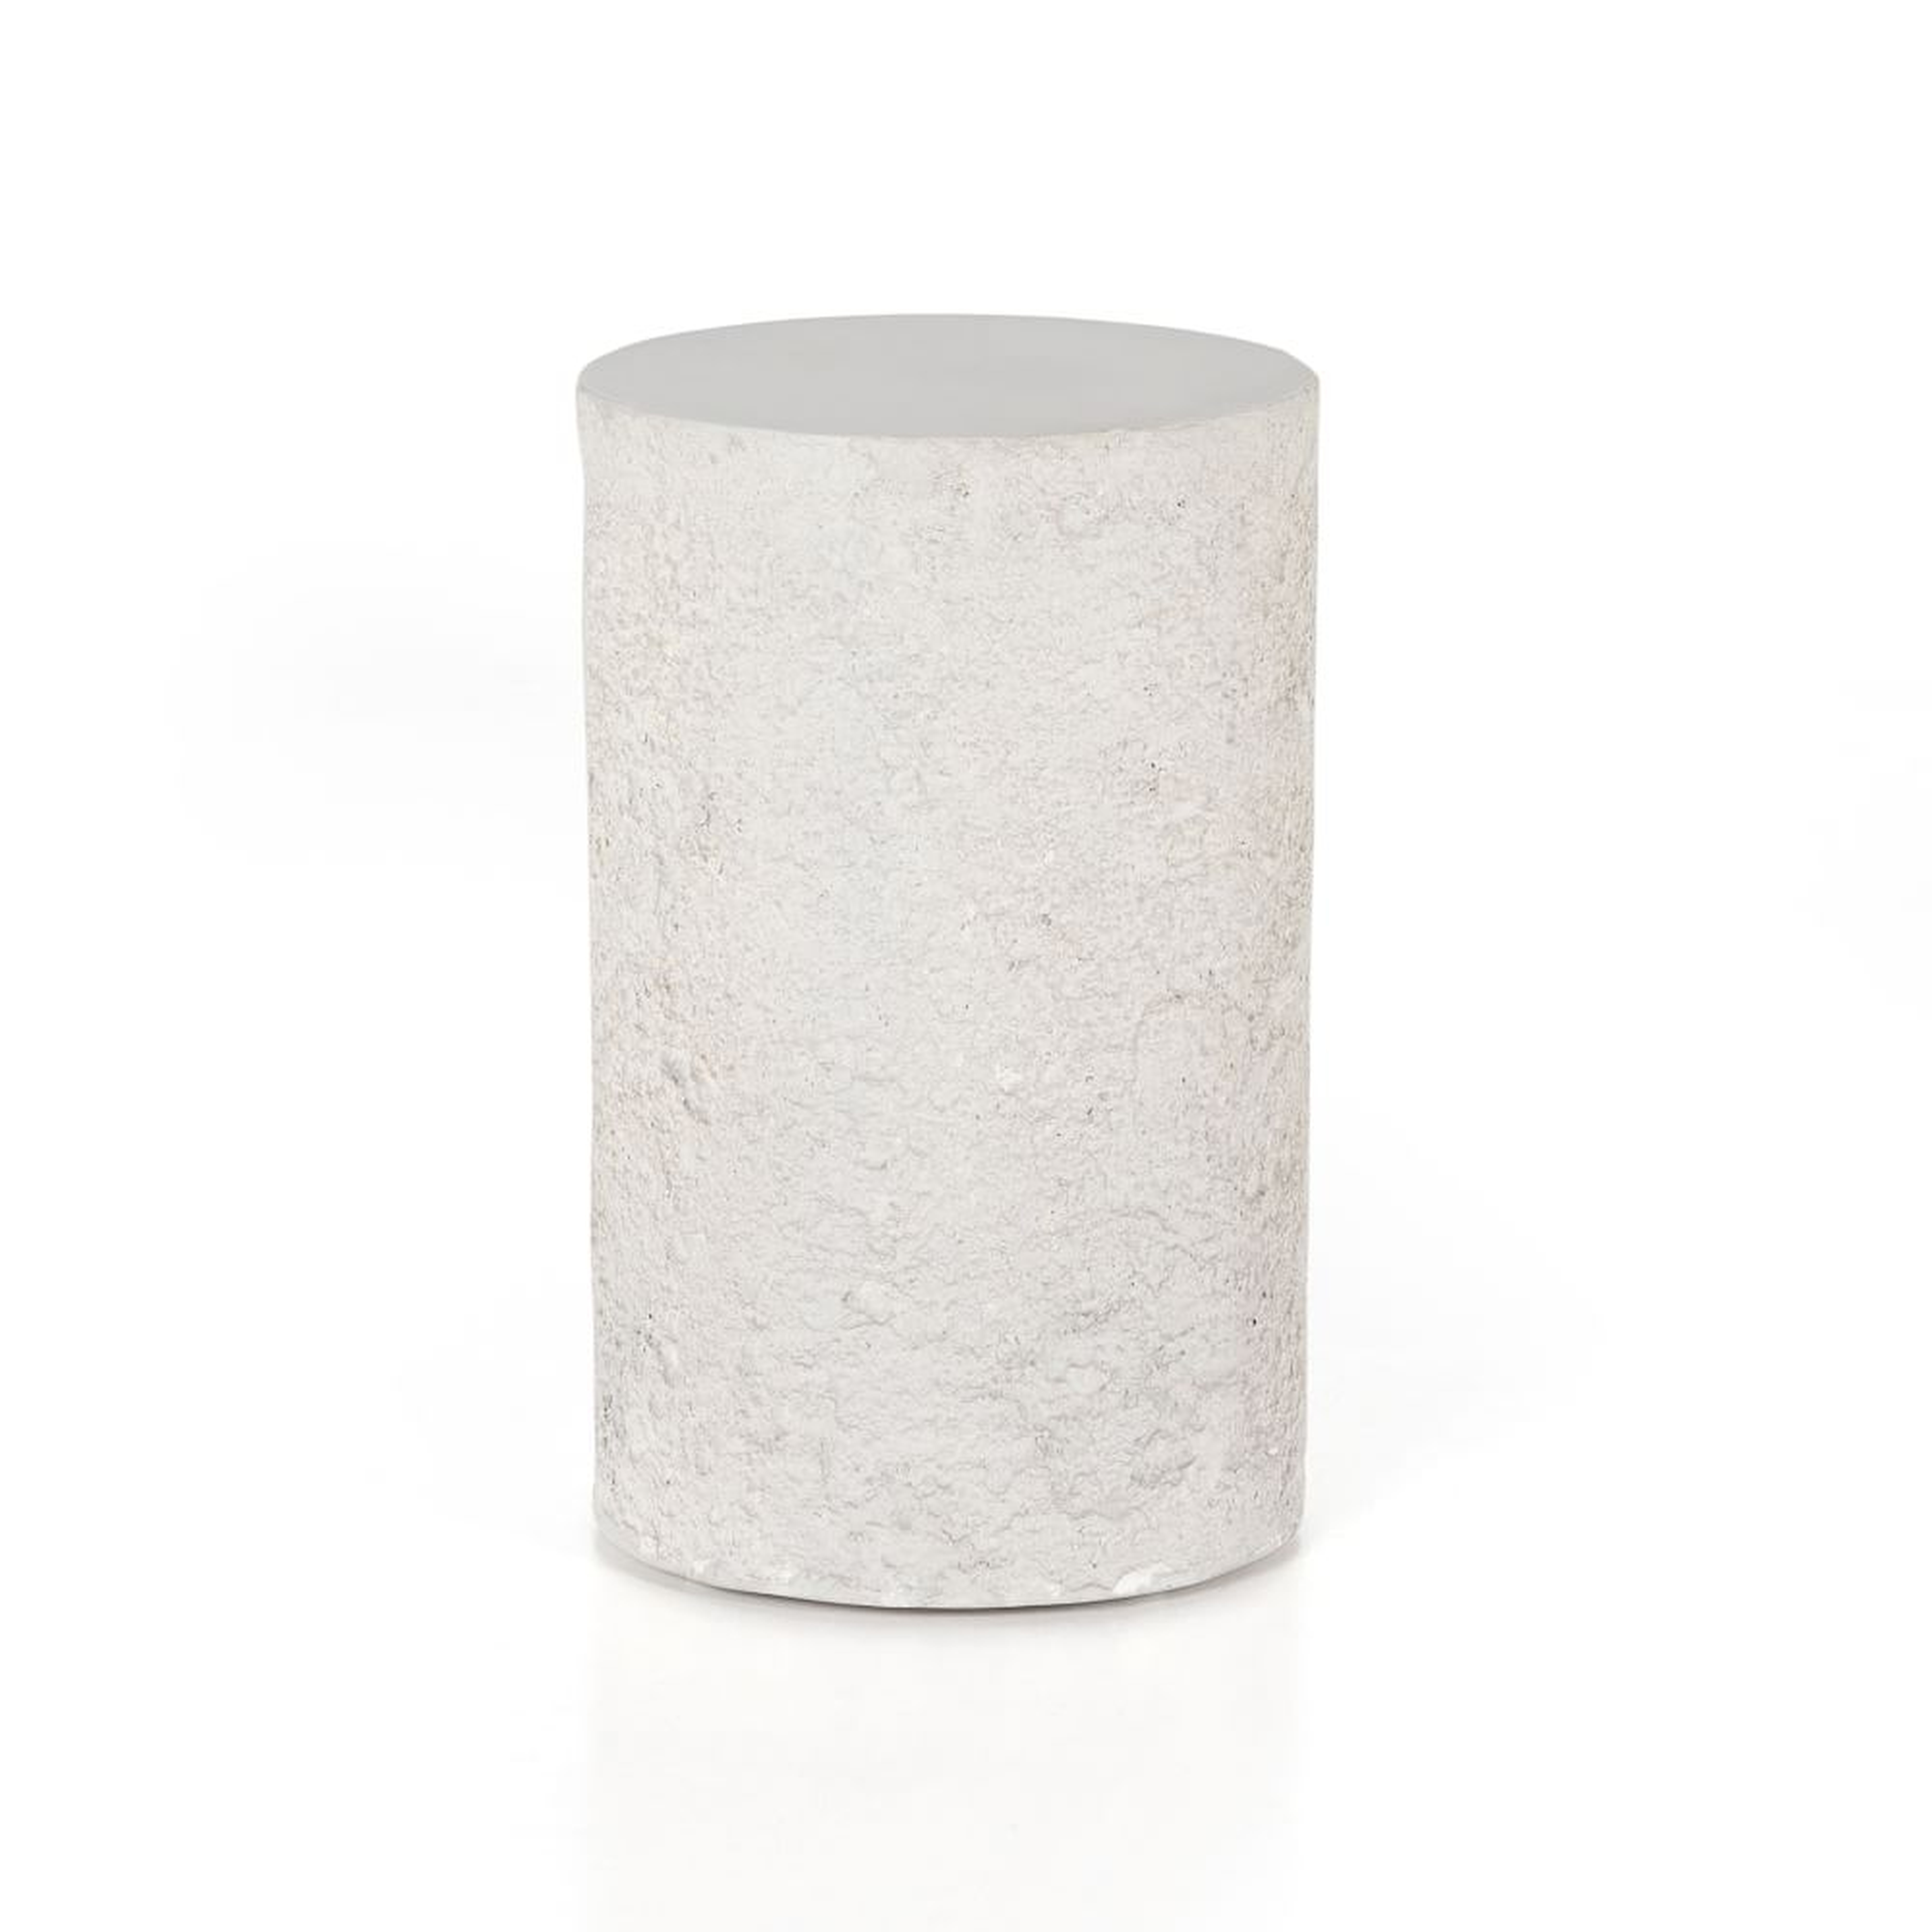 Rounded Outdoor Concrete Side Table - West Elm